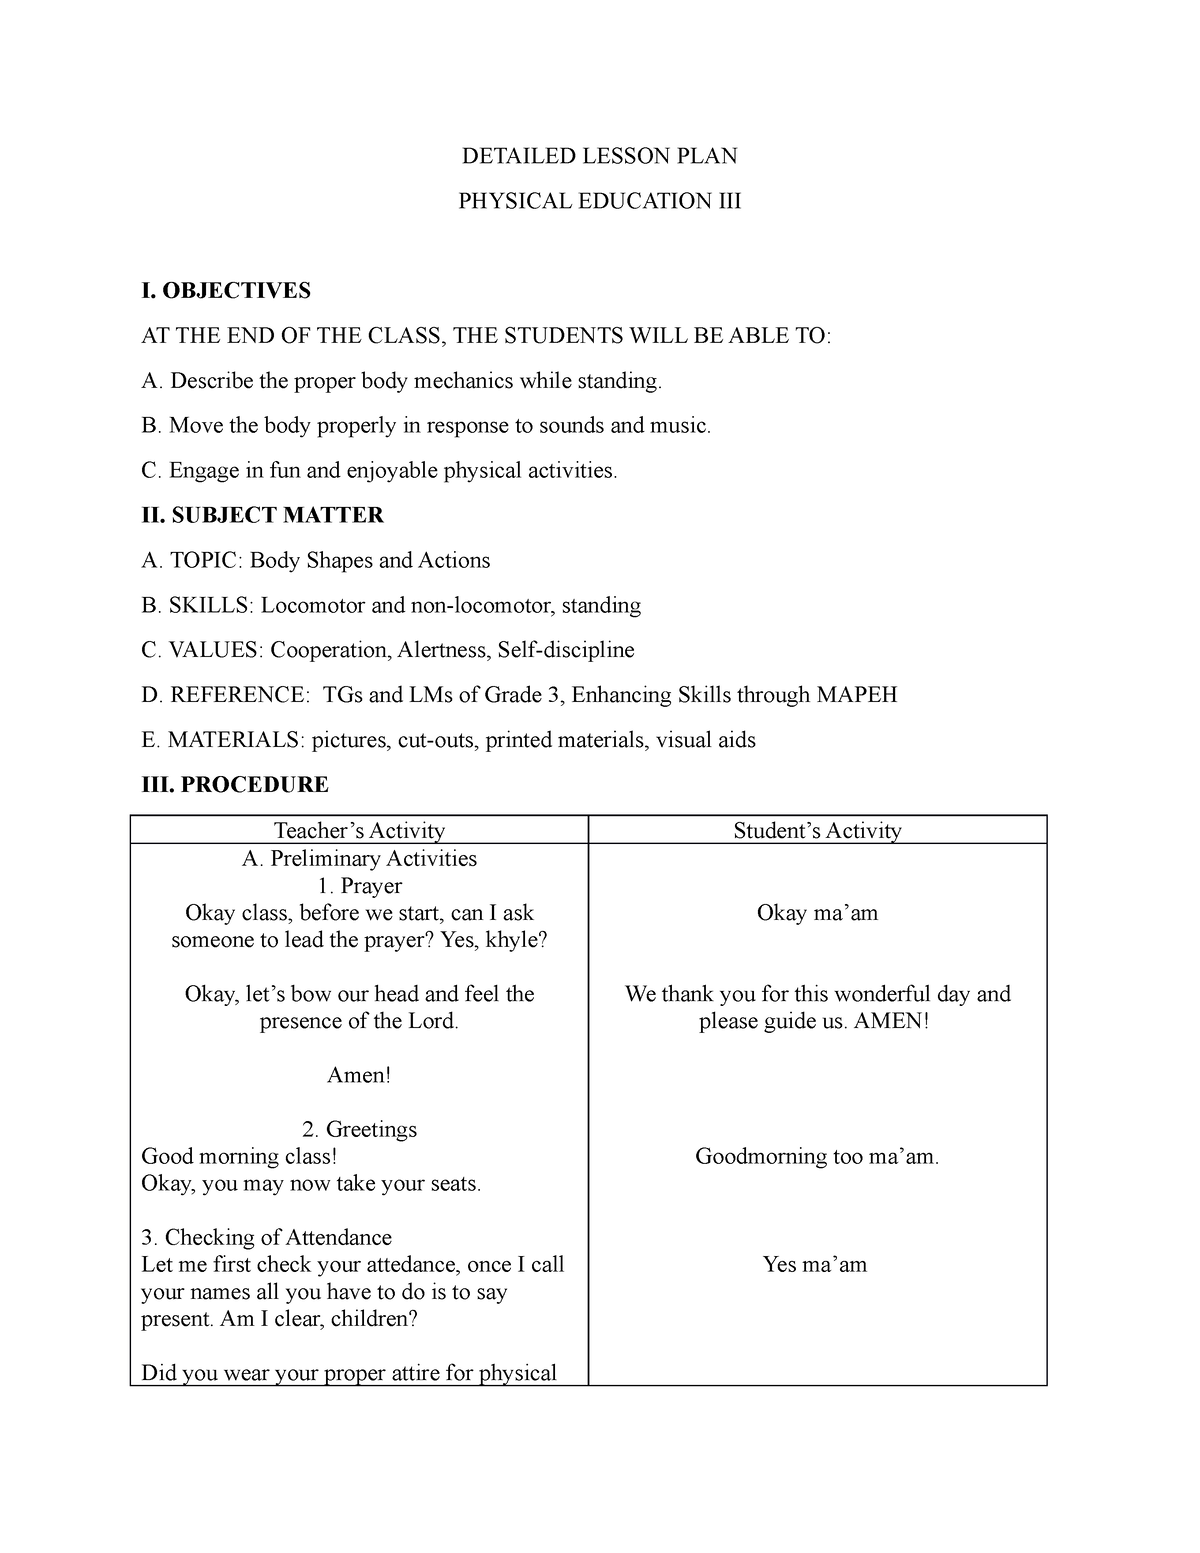 physical education lesson plan grade 3